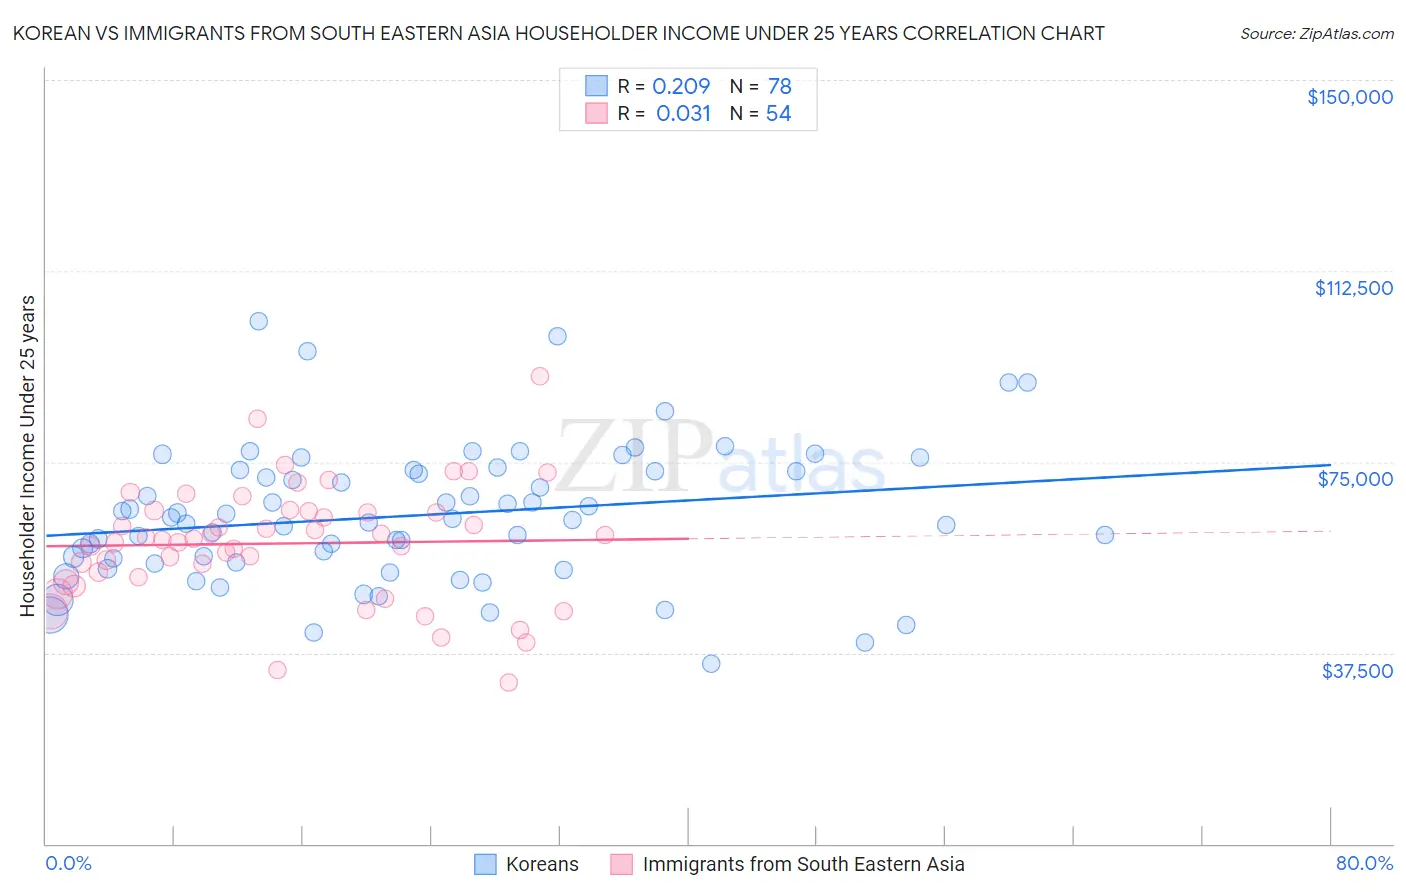 Korean vs Immigrants from South Eastern Asia Householder Income Under 25 years